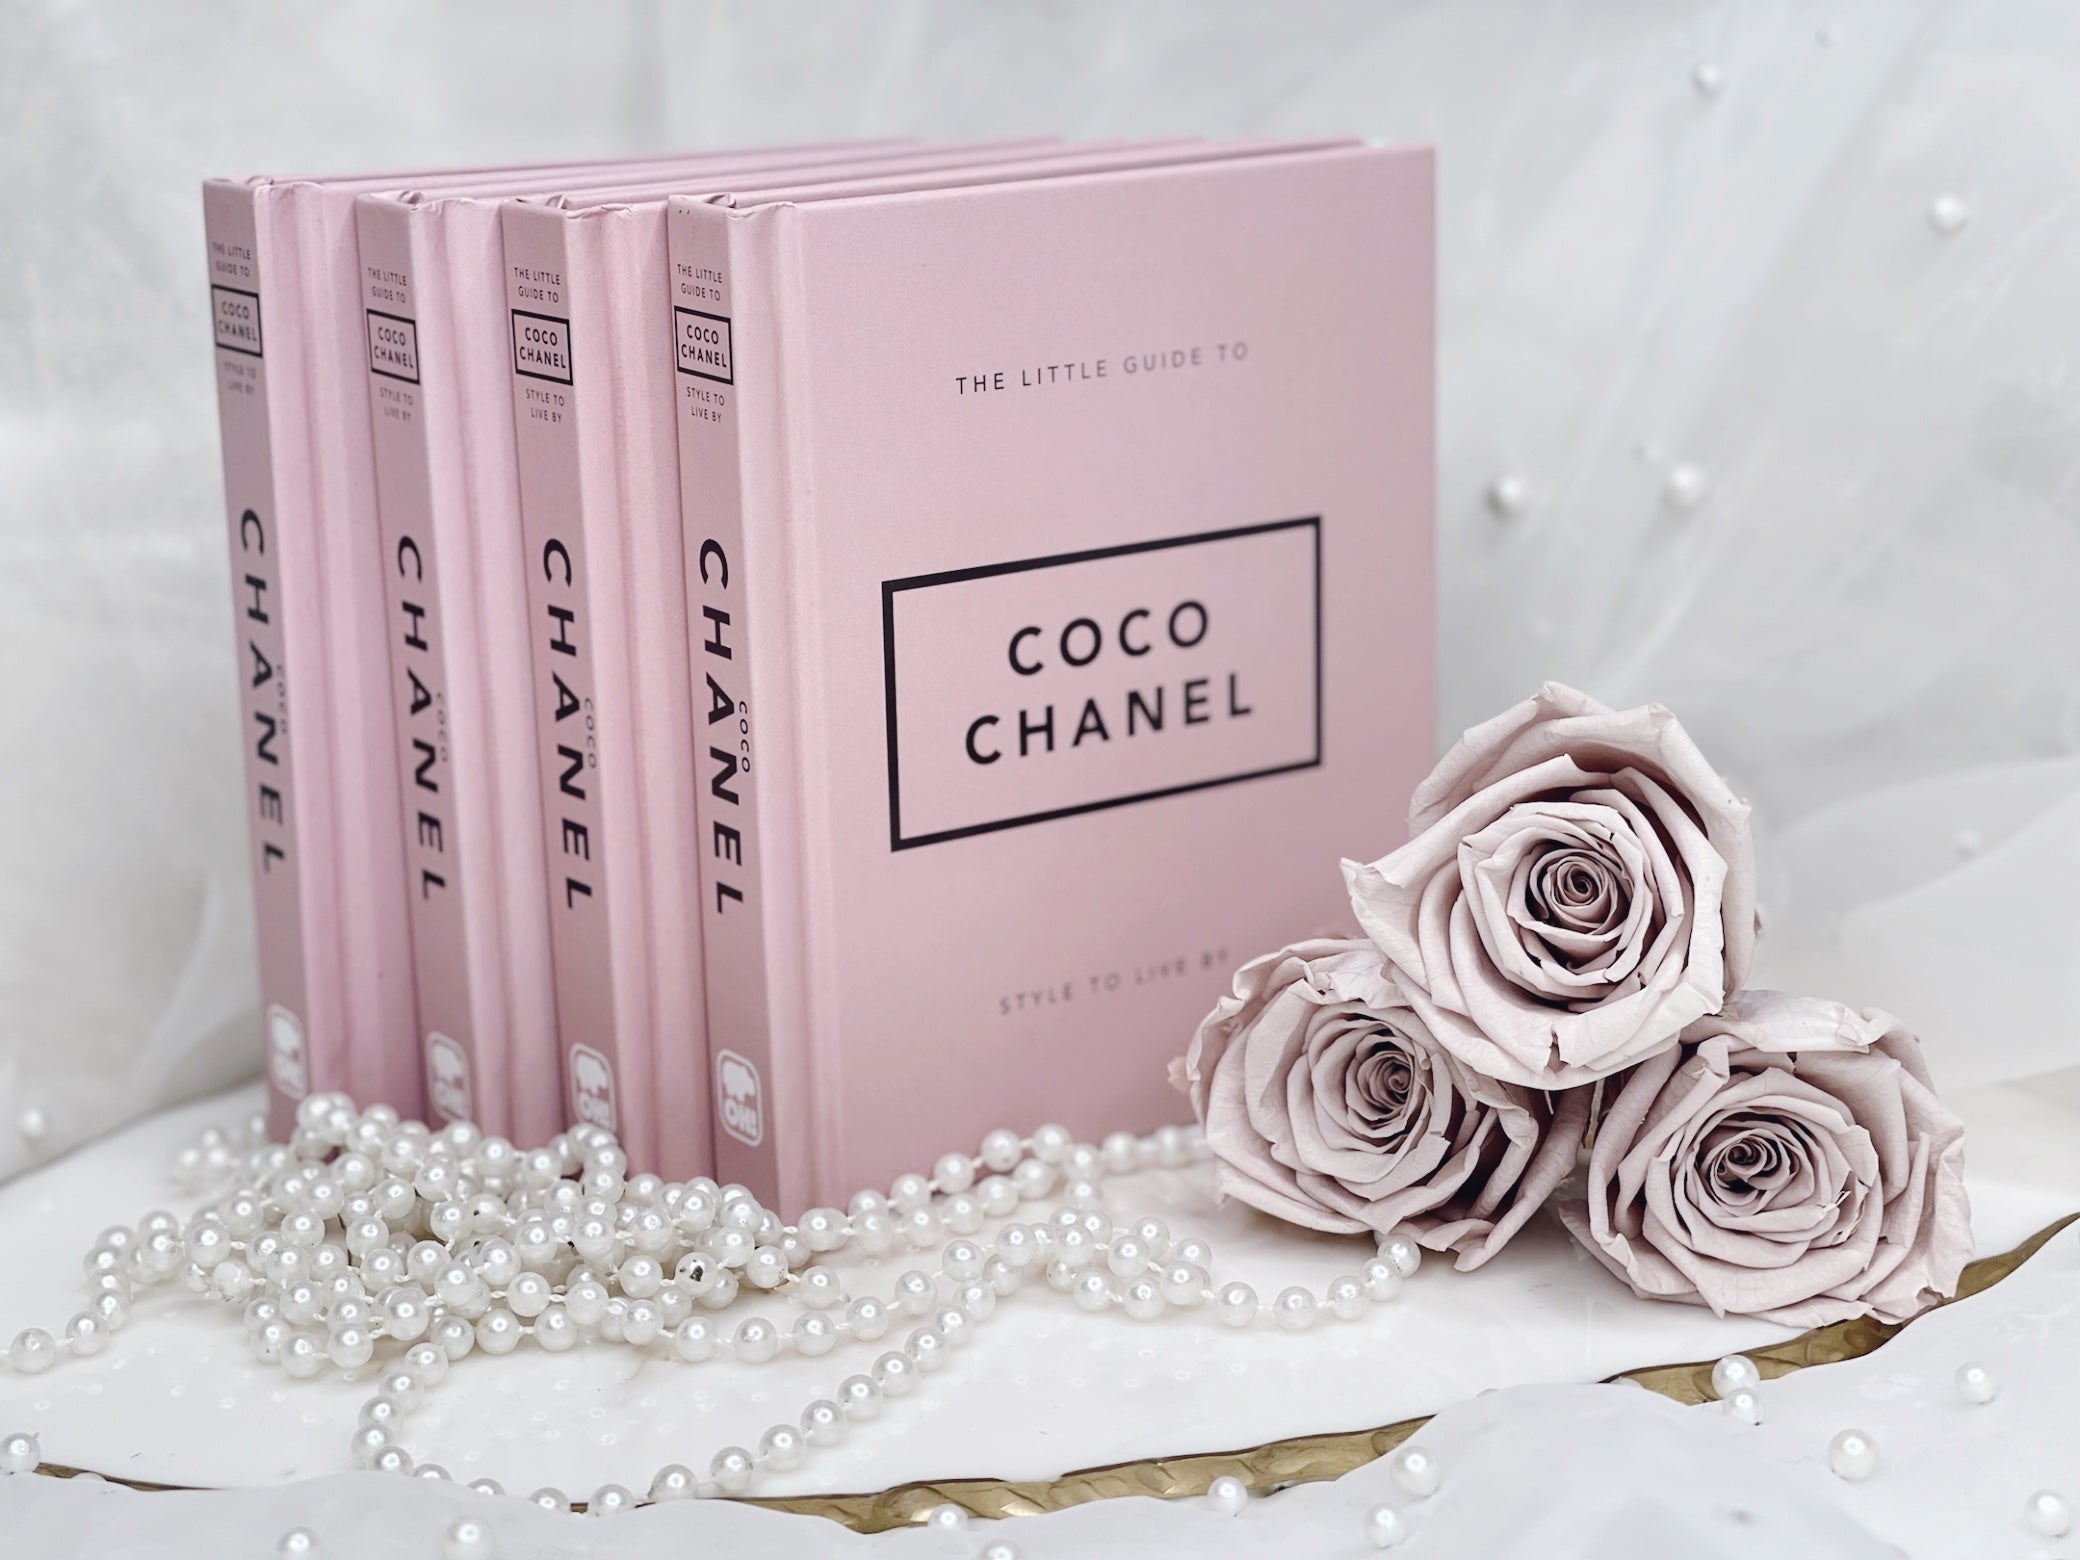 THE LITTLE GUIDE TO COCO CHANEL